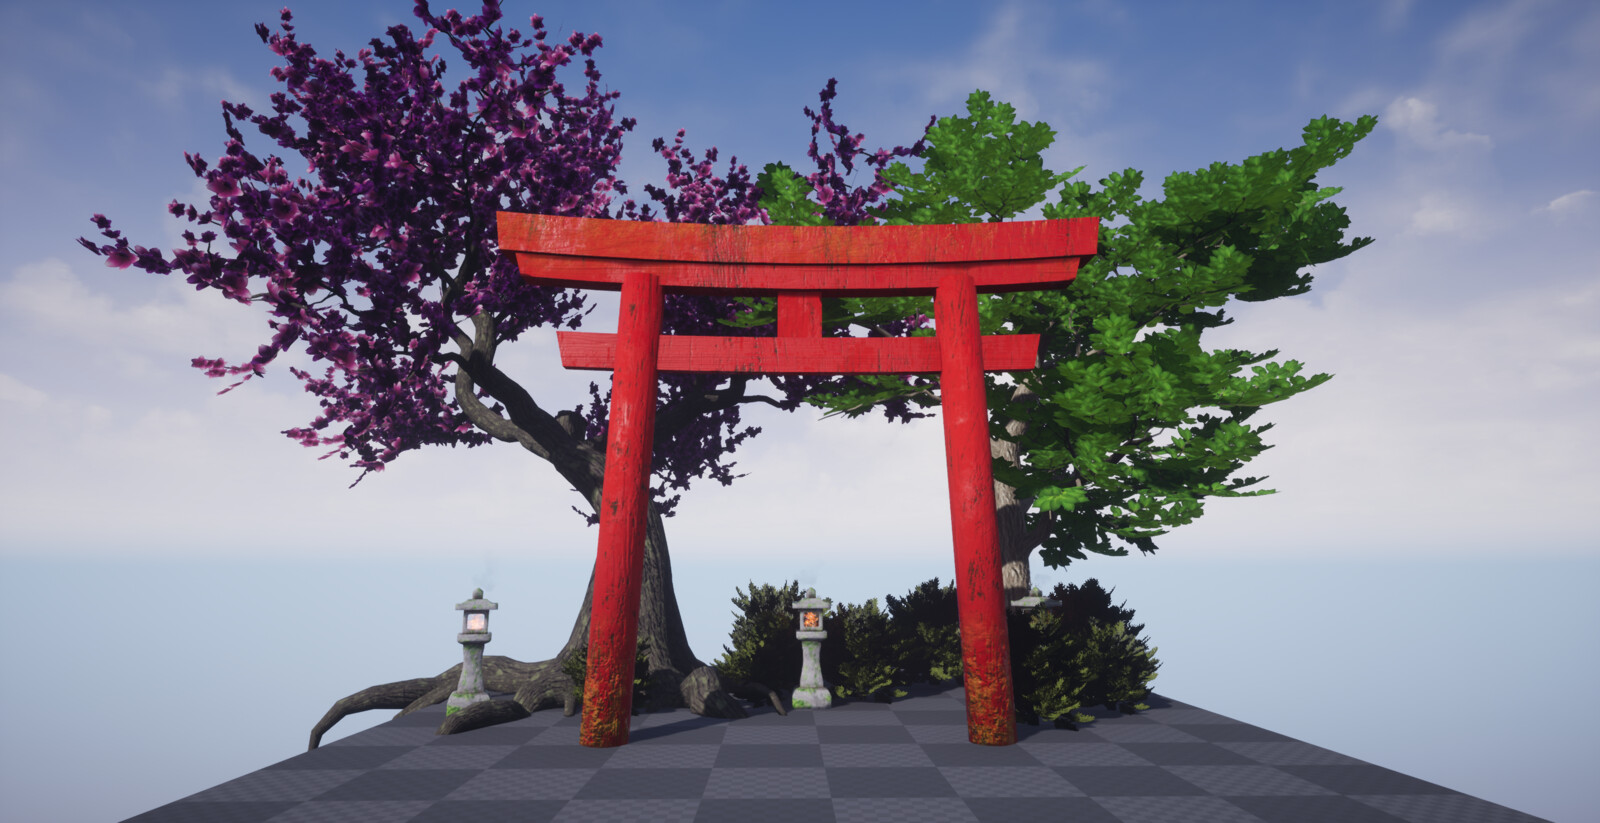 Foliage  and main assets. Foliage was created, using SpeedTree